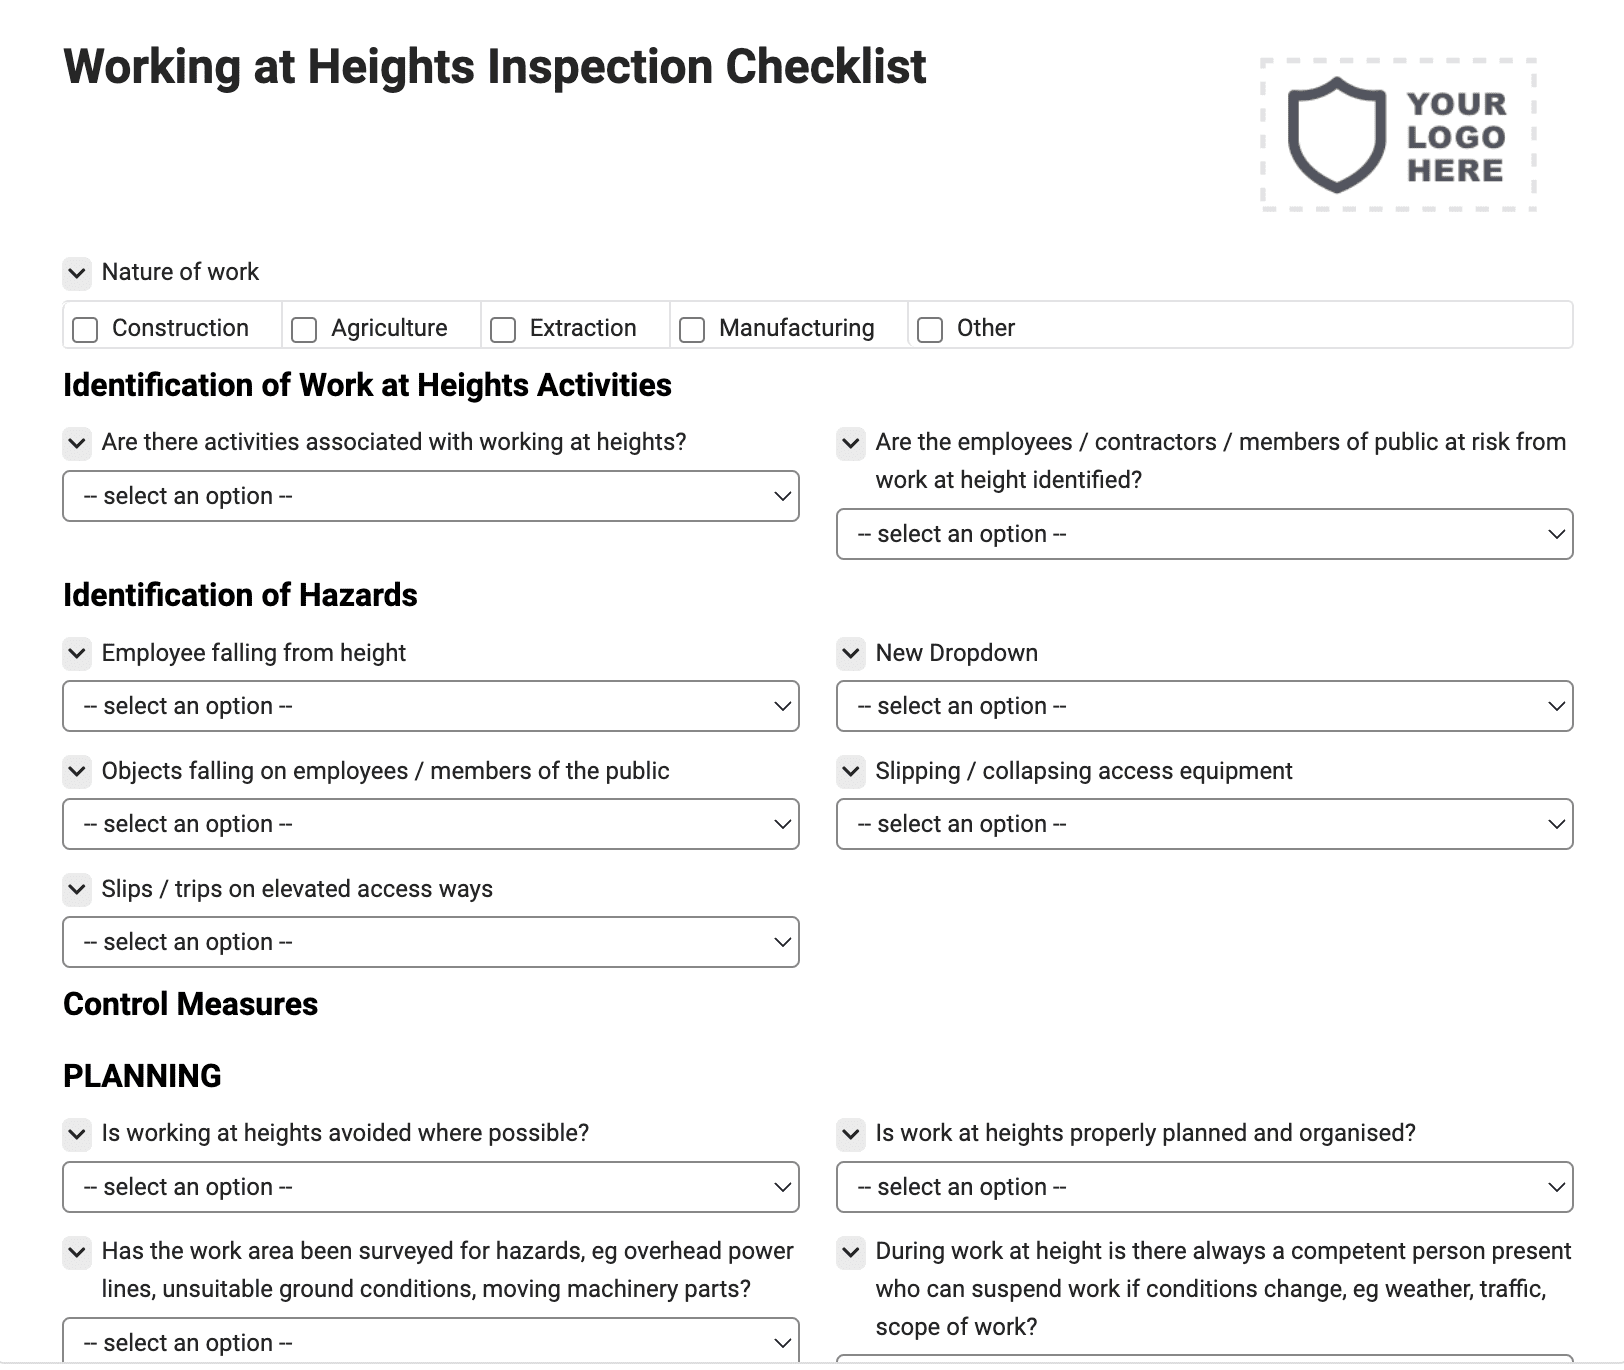 Working at Heights Inspection Checklist